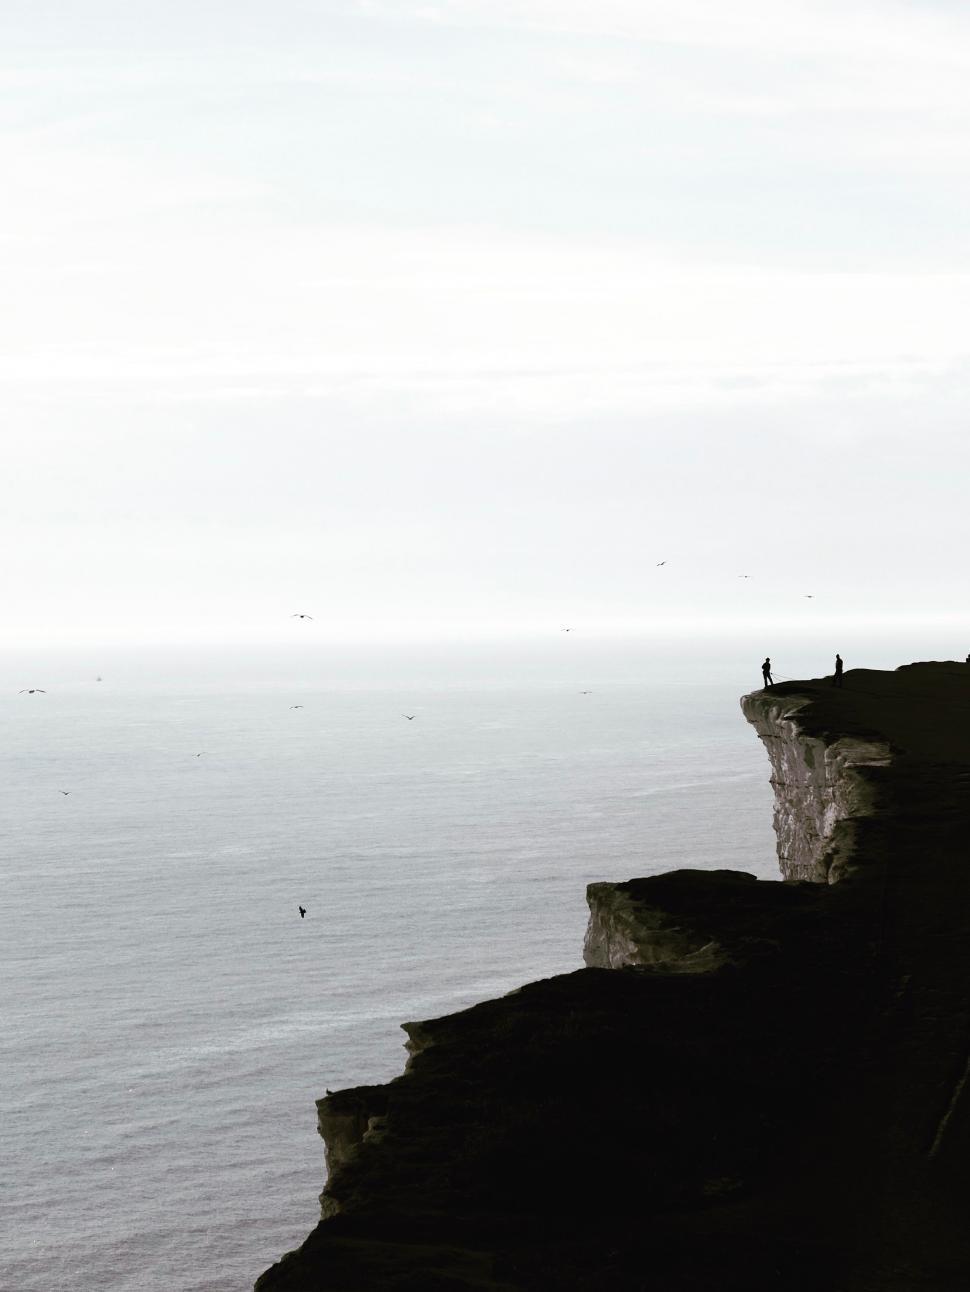 Free Image of Person Standing on Cliff Overlooking Ocean 